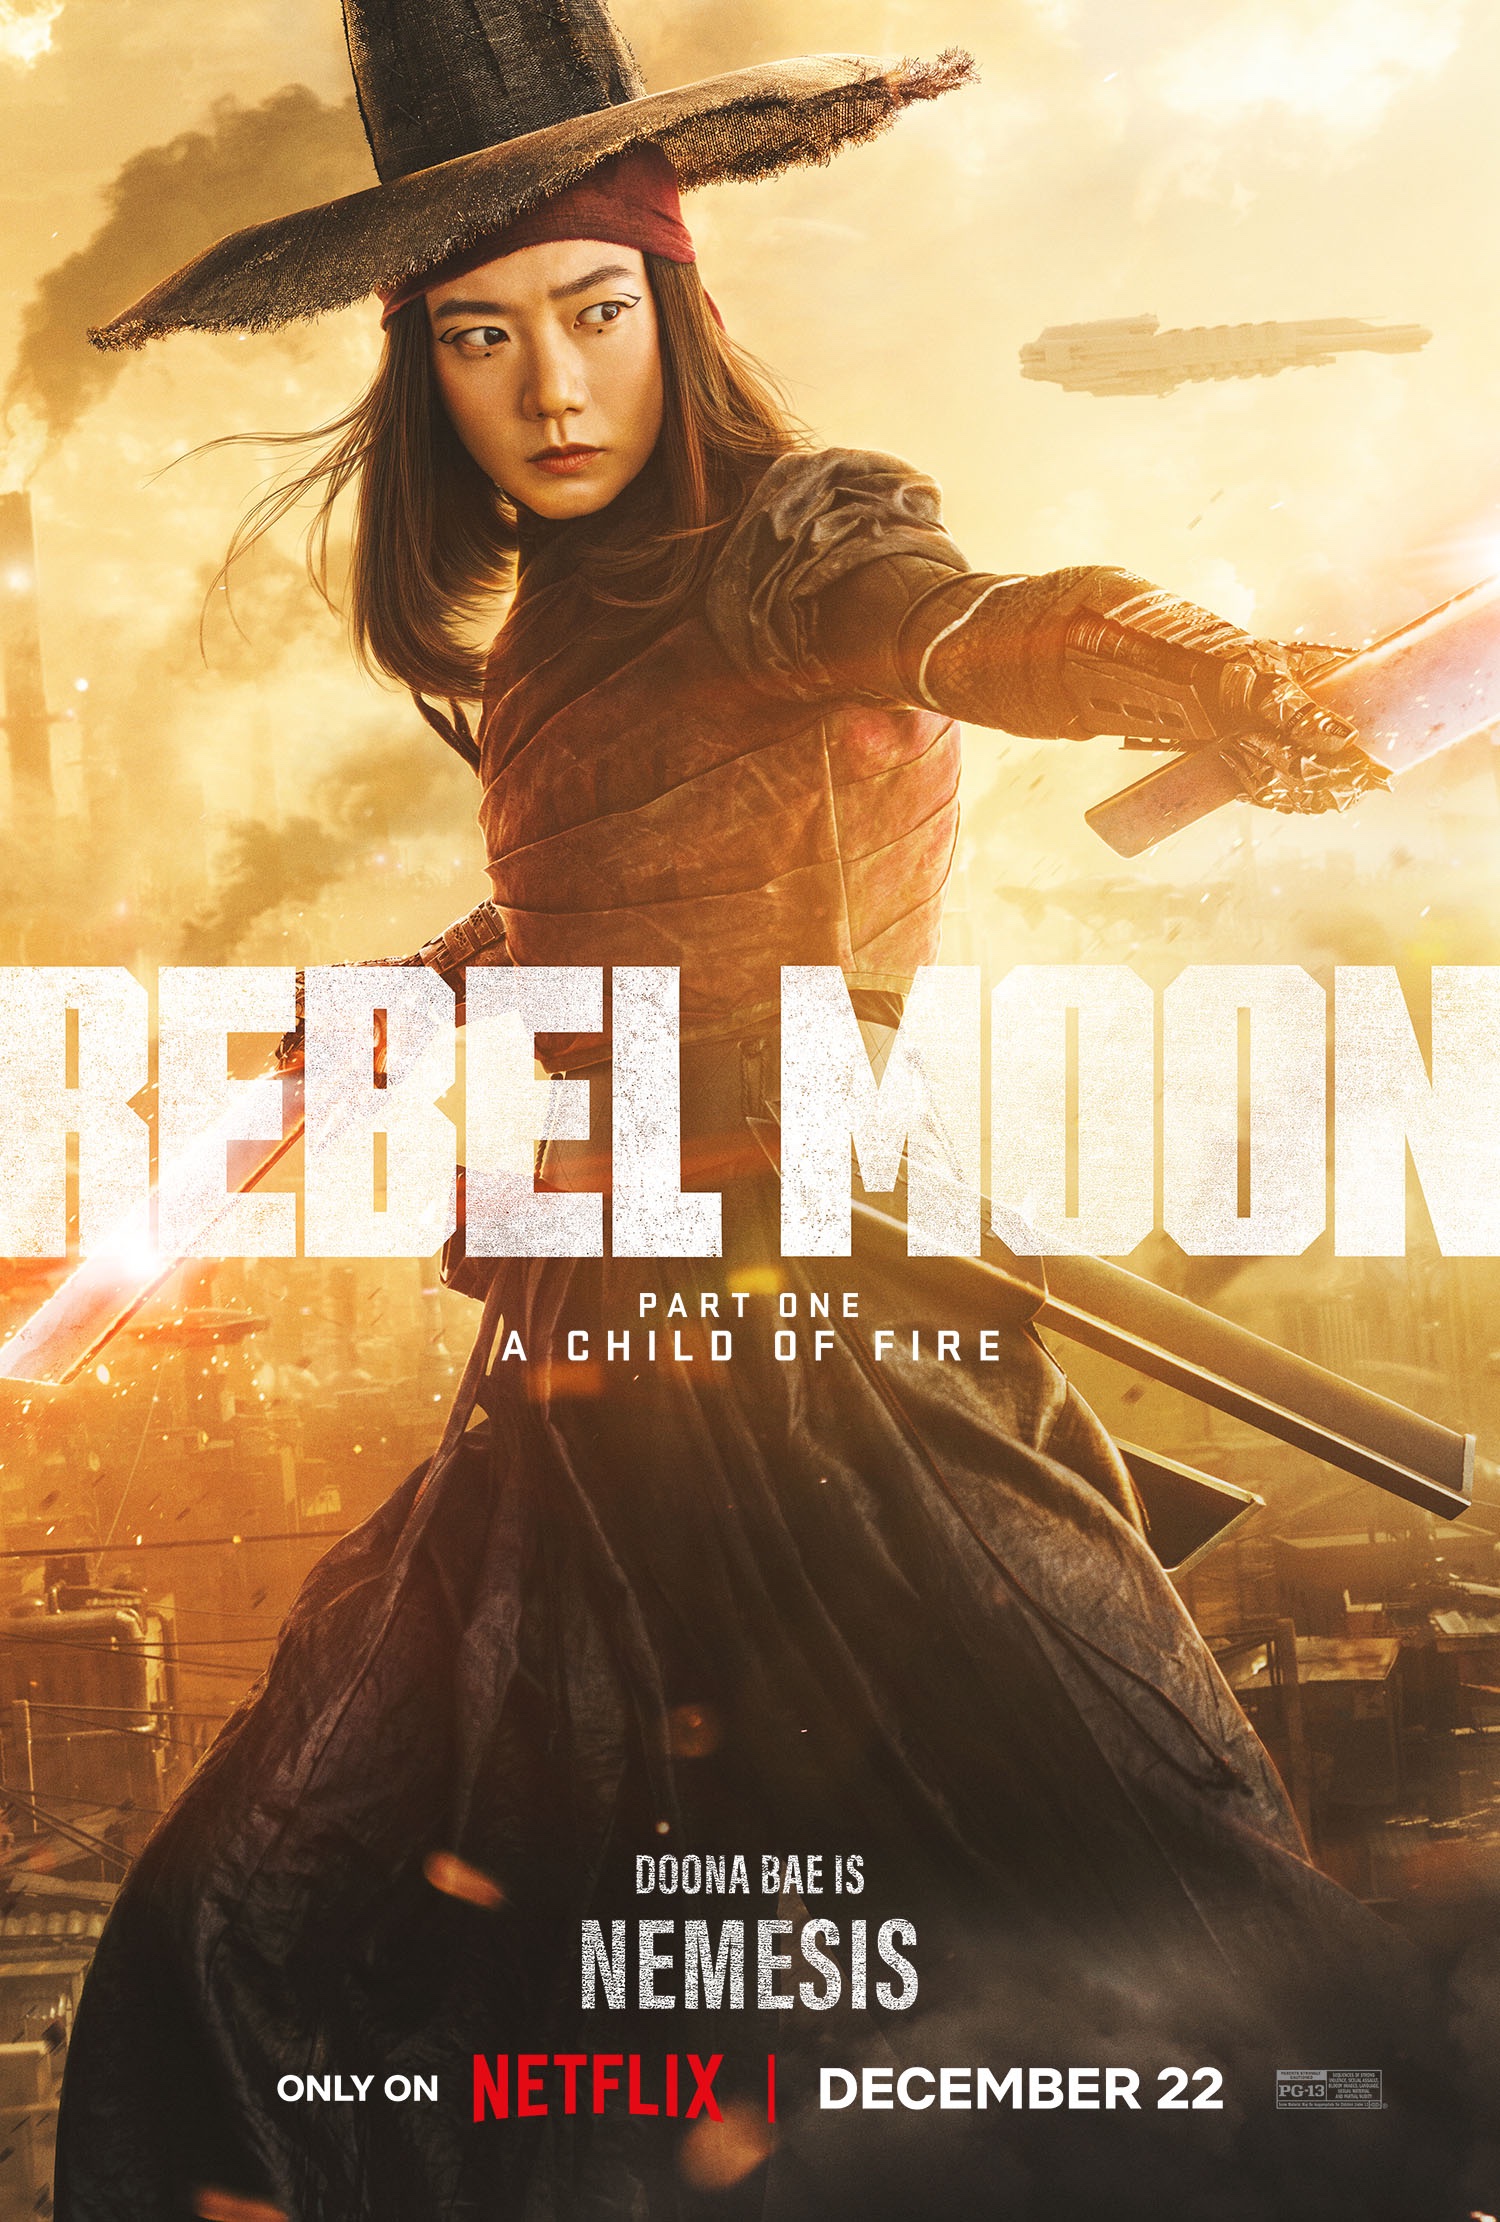 Rebel Moon - Part One: A Child of Fire' trailer out now: Watch here - Good  Morning America